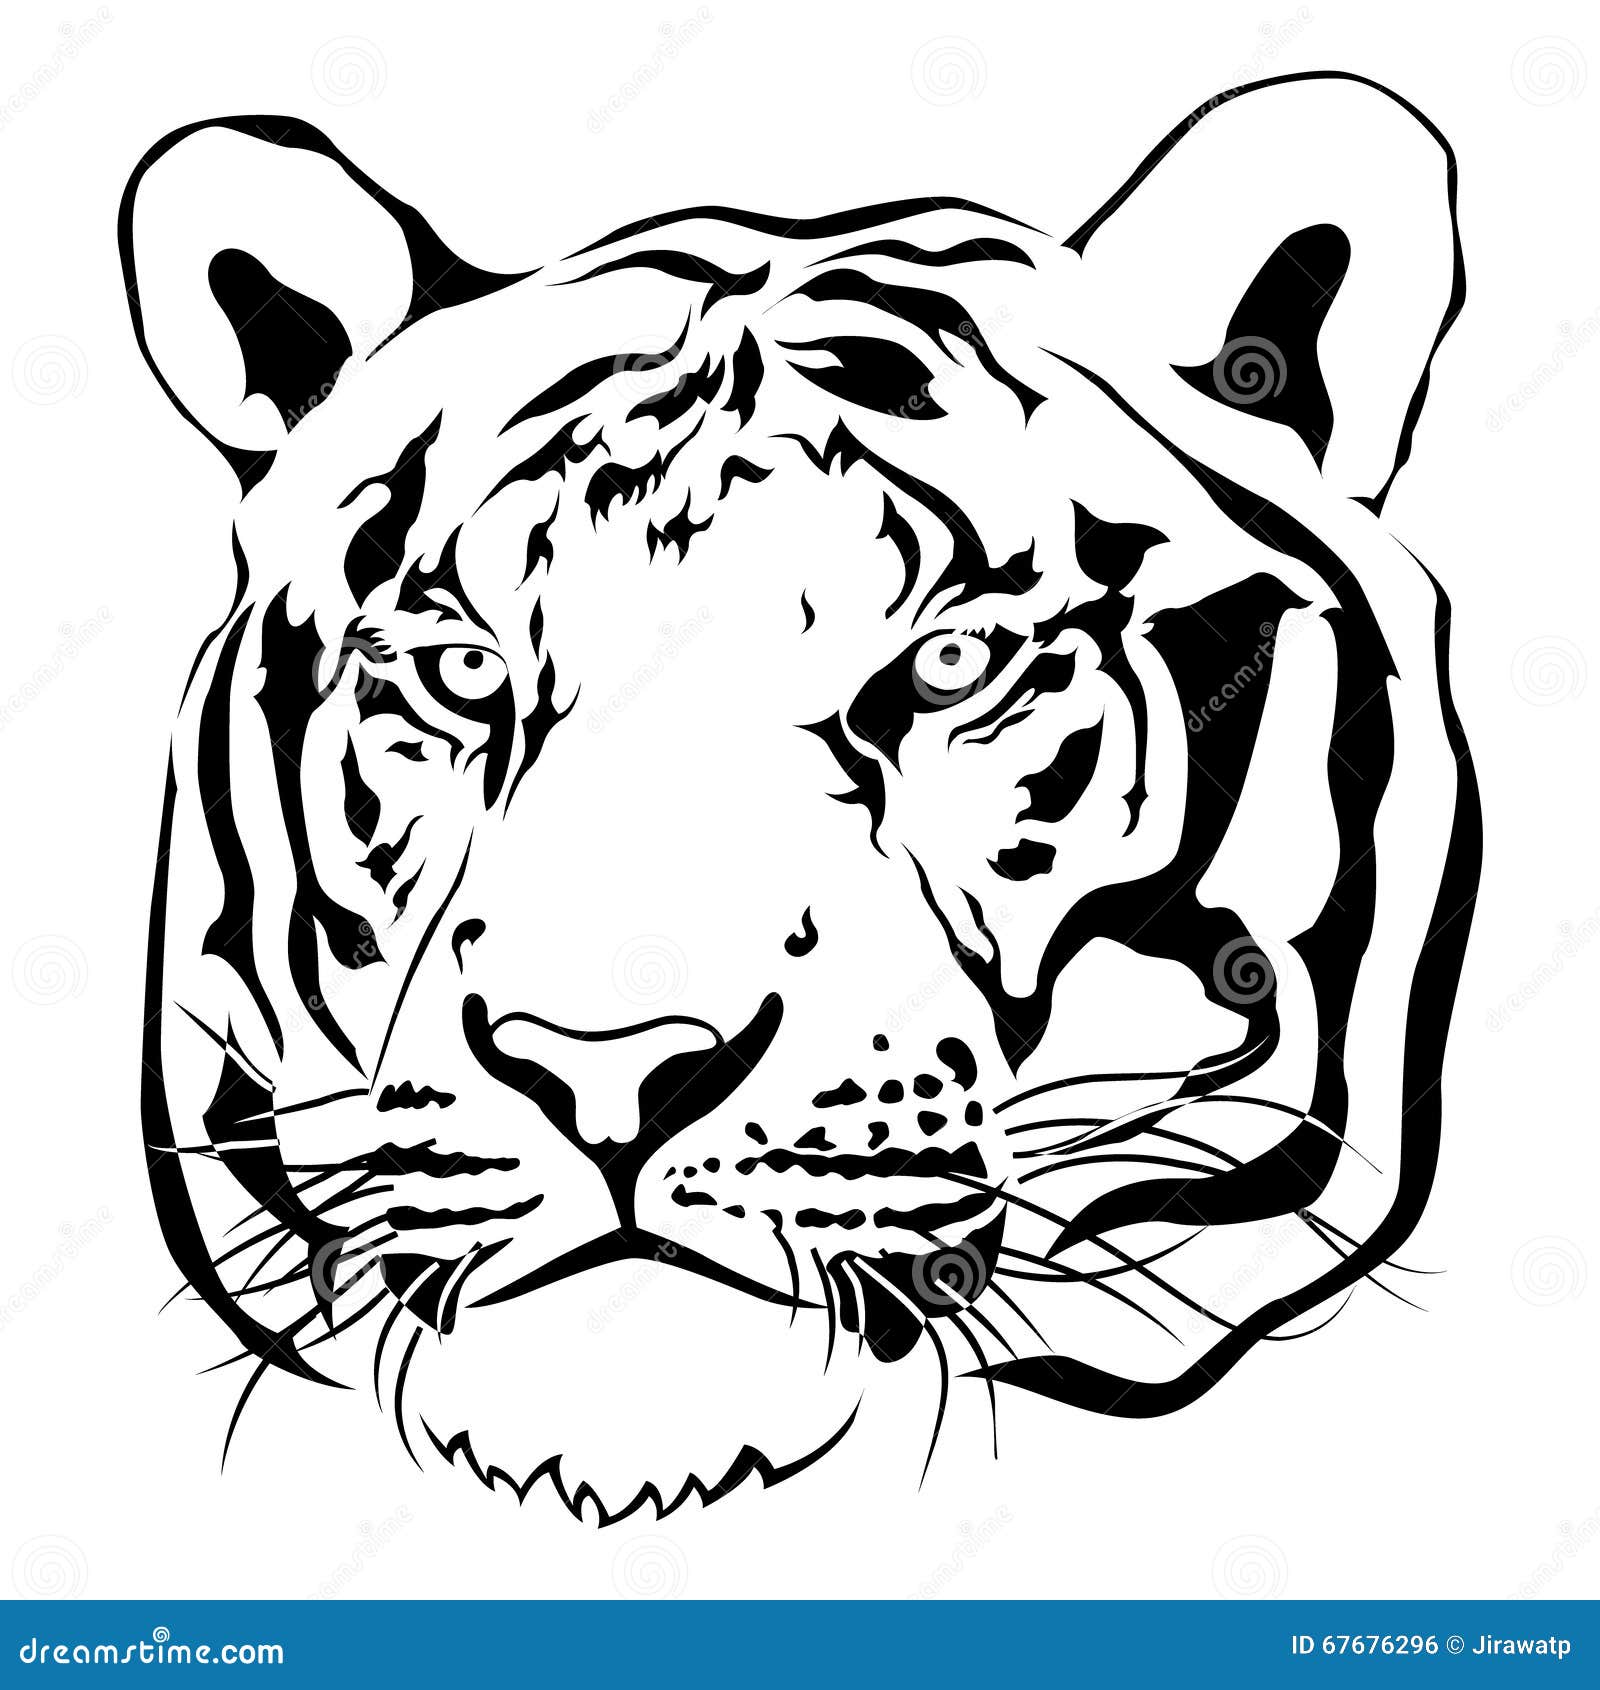 Tiger Head Black and White, Vector Stock Vector - Illustration of ...